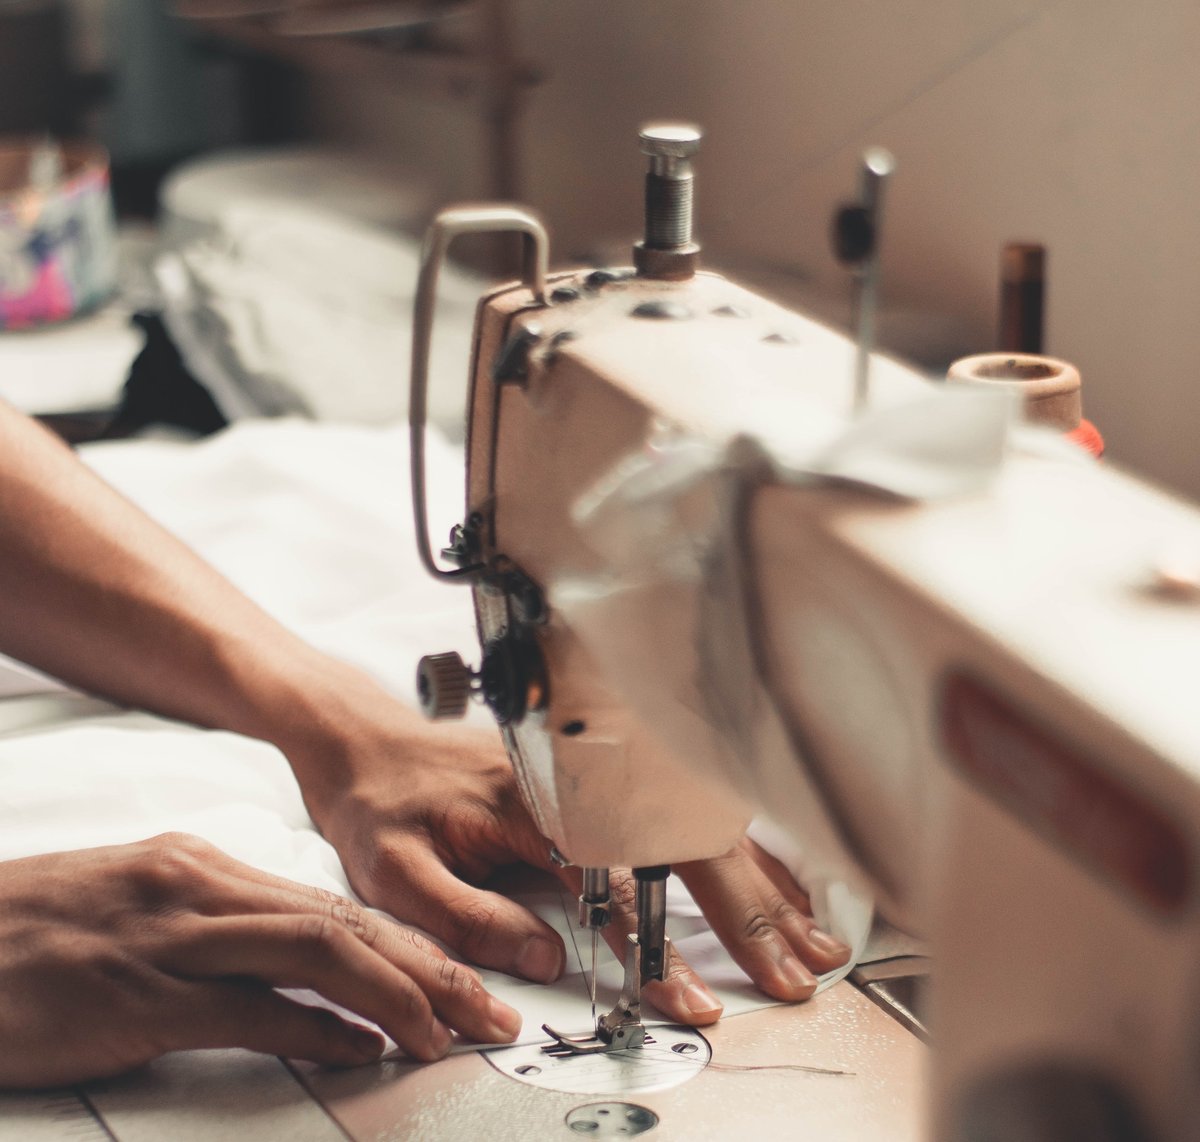 MakersValley Blog | Made-to-Order Fashion Tackles the Industry's Biggest Sustainability Issue